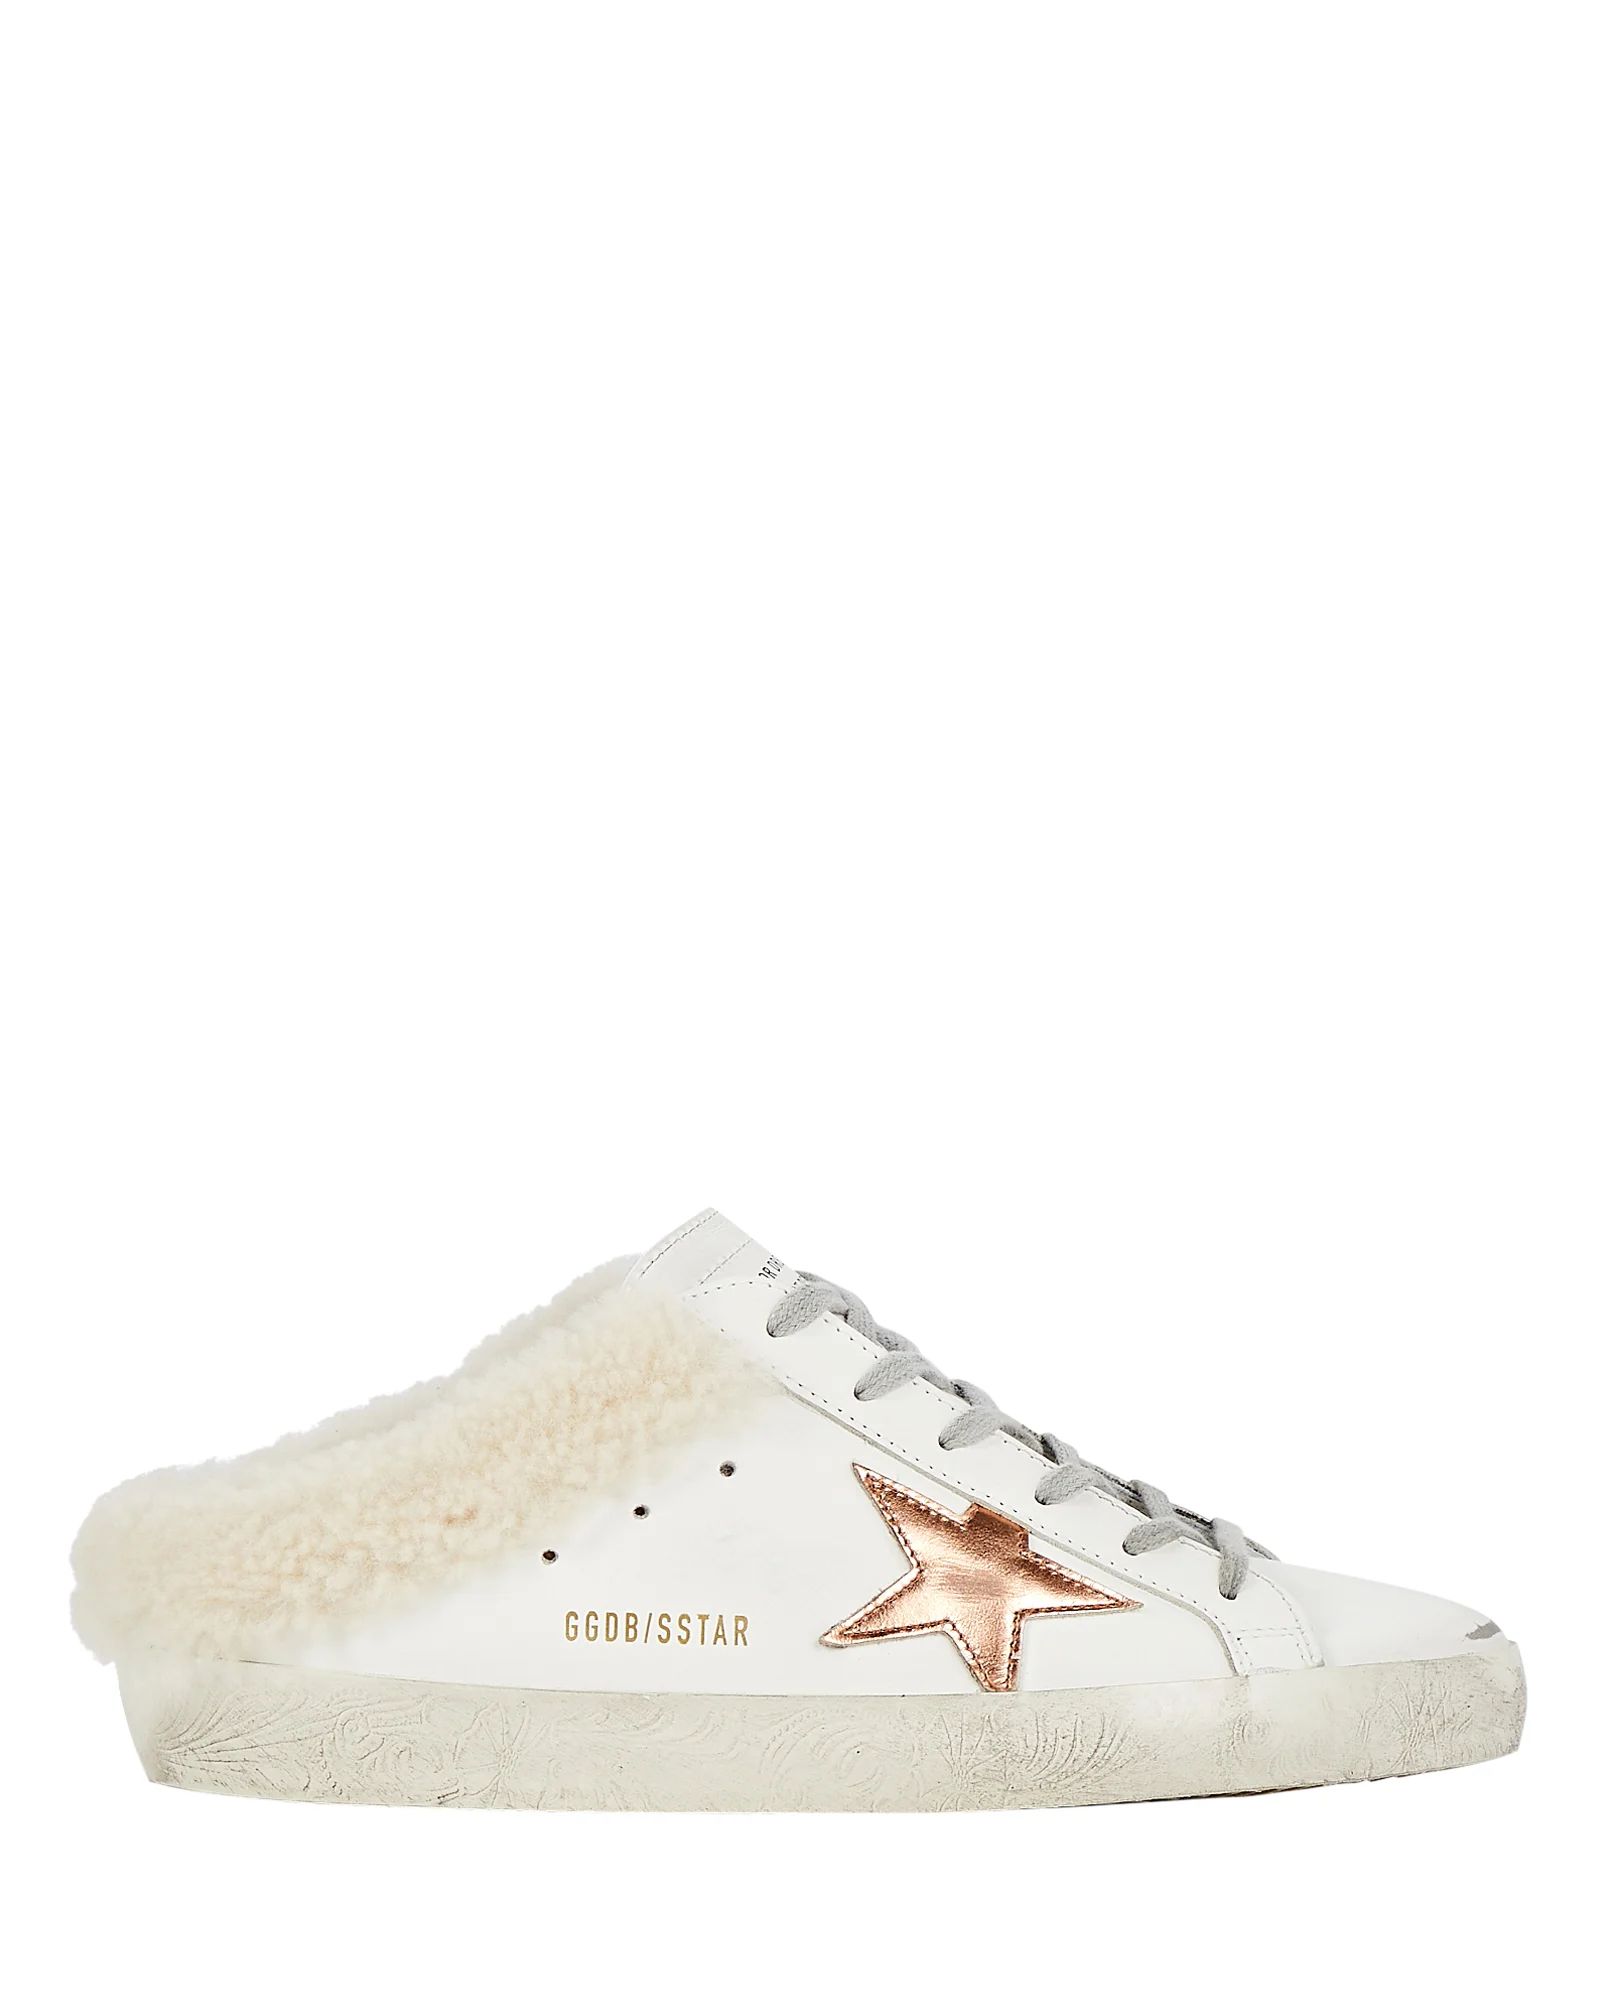 Golden Goose Superstar Sabot Shearling-Lined Sneakers, White 36 | INTERMIX